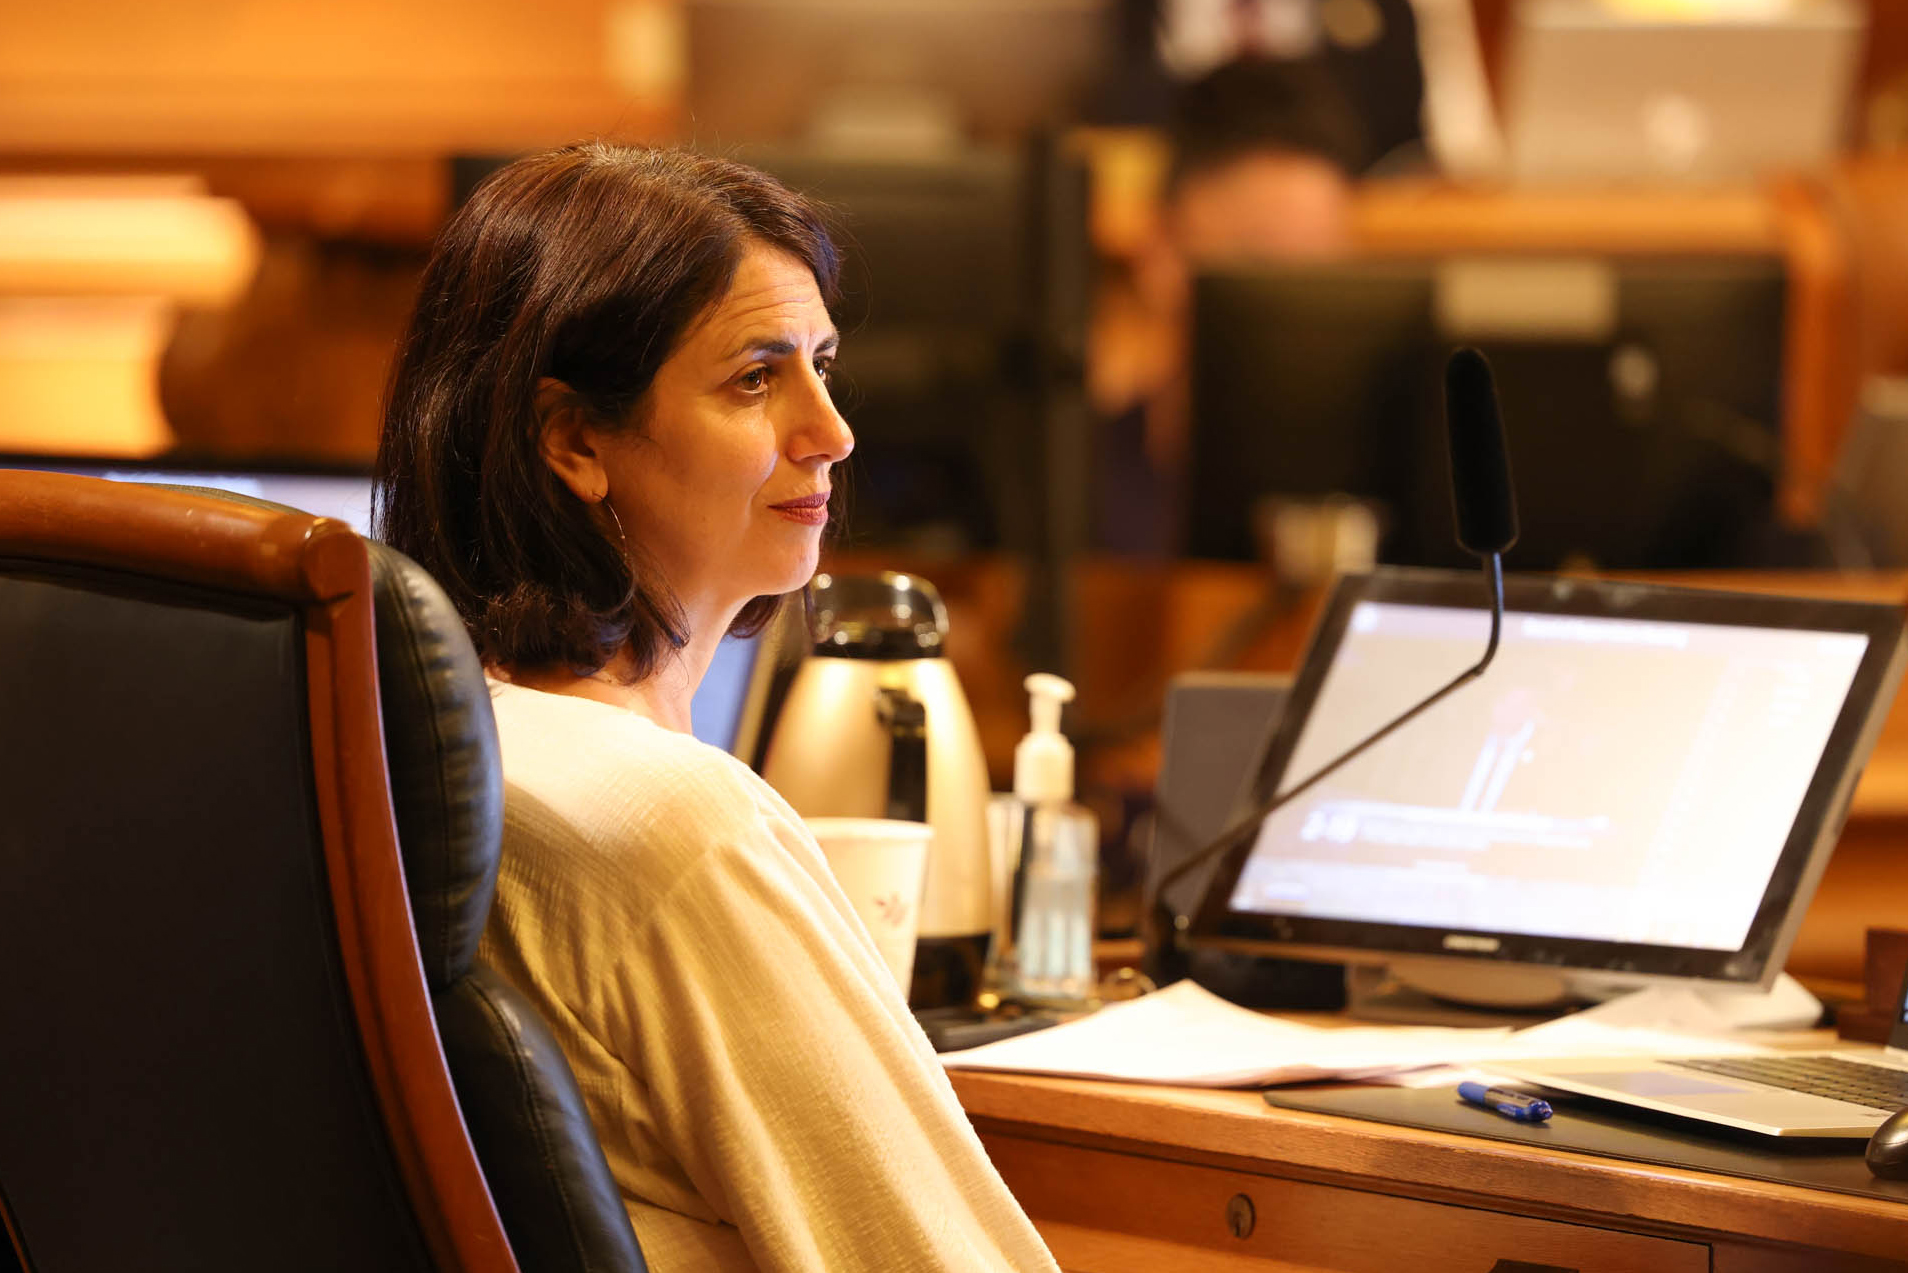 A side profile of a woman in a light sweater sitting in front of a dais with an open laptop. 